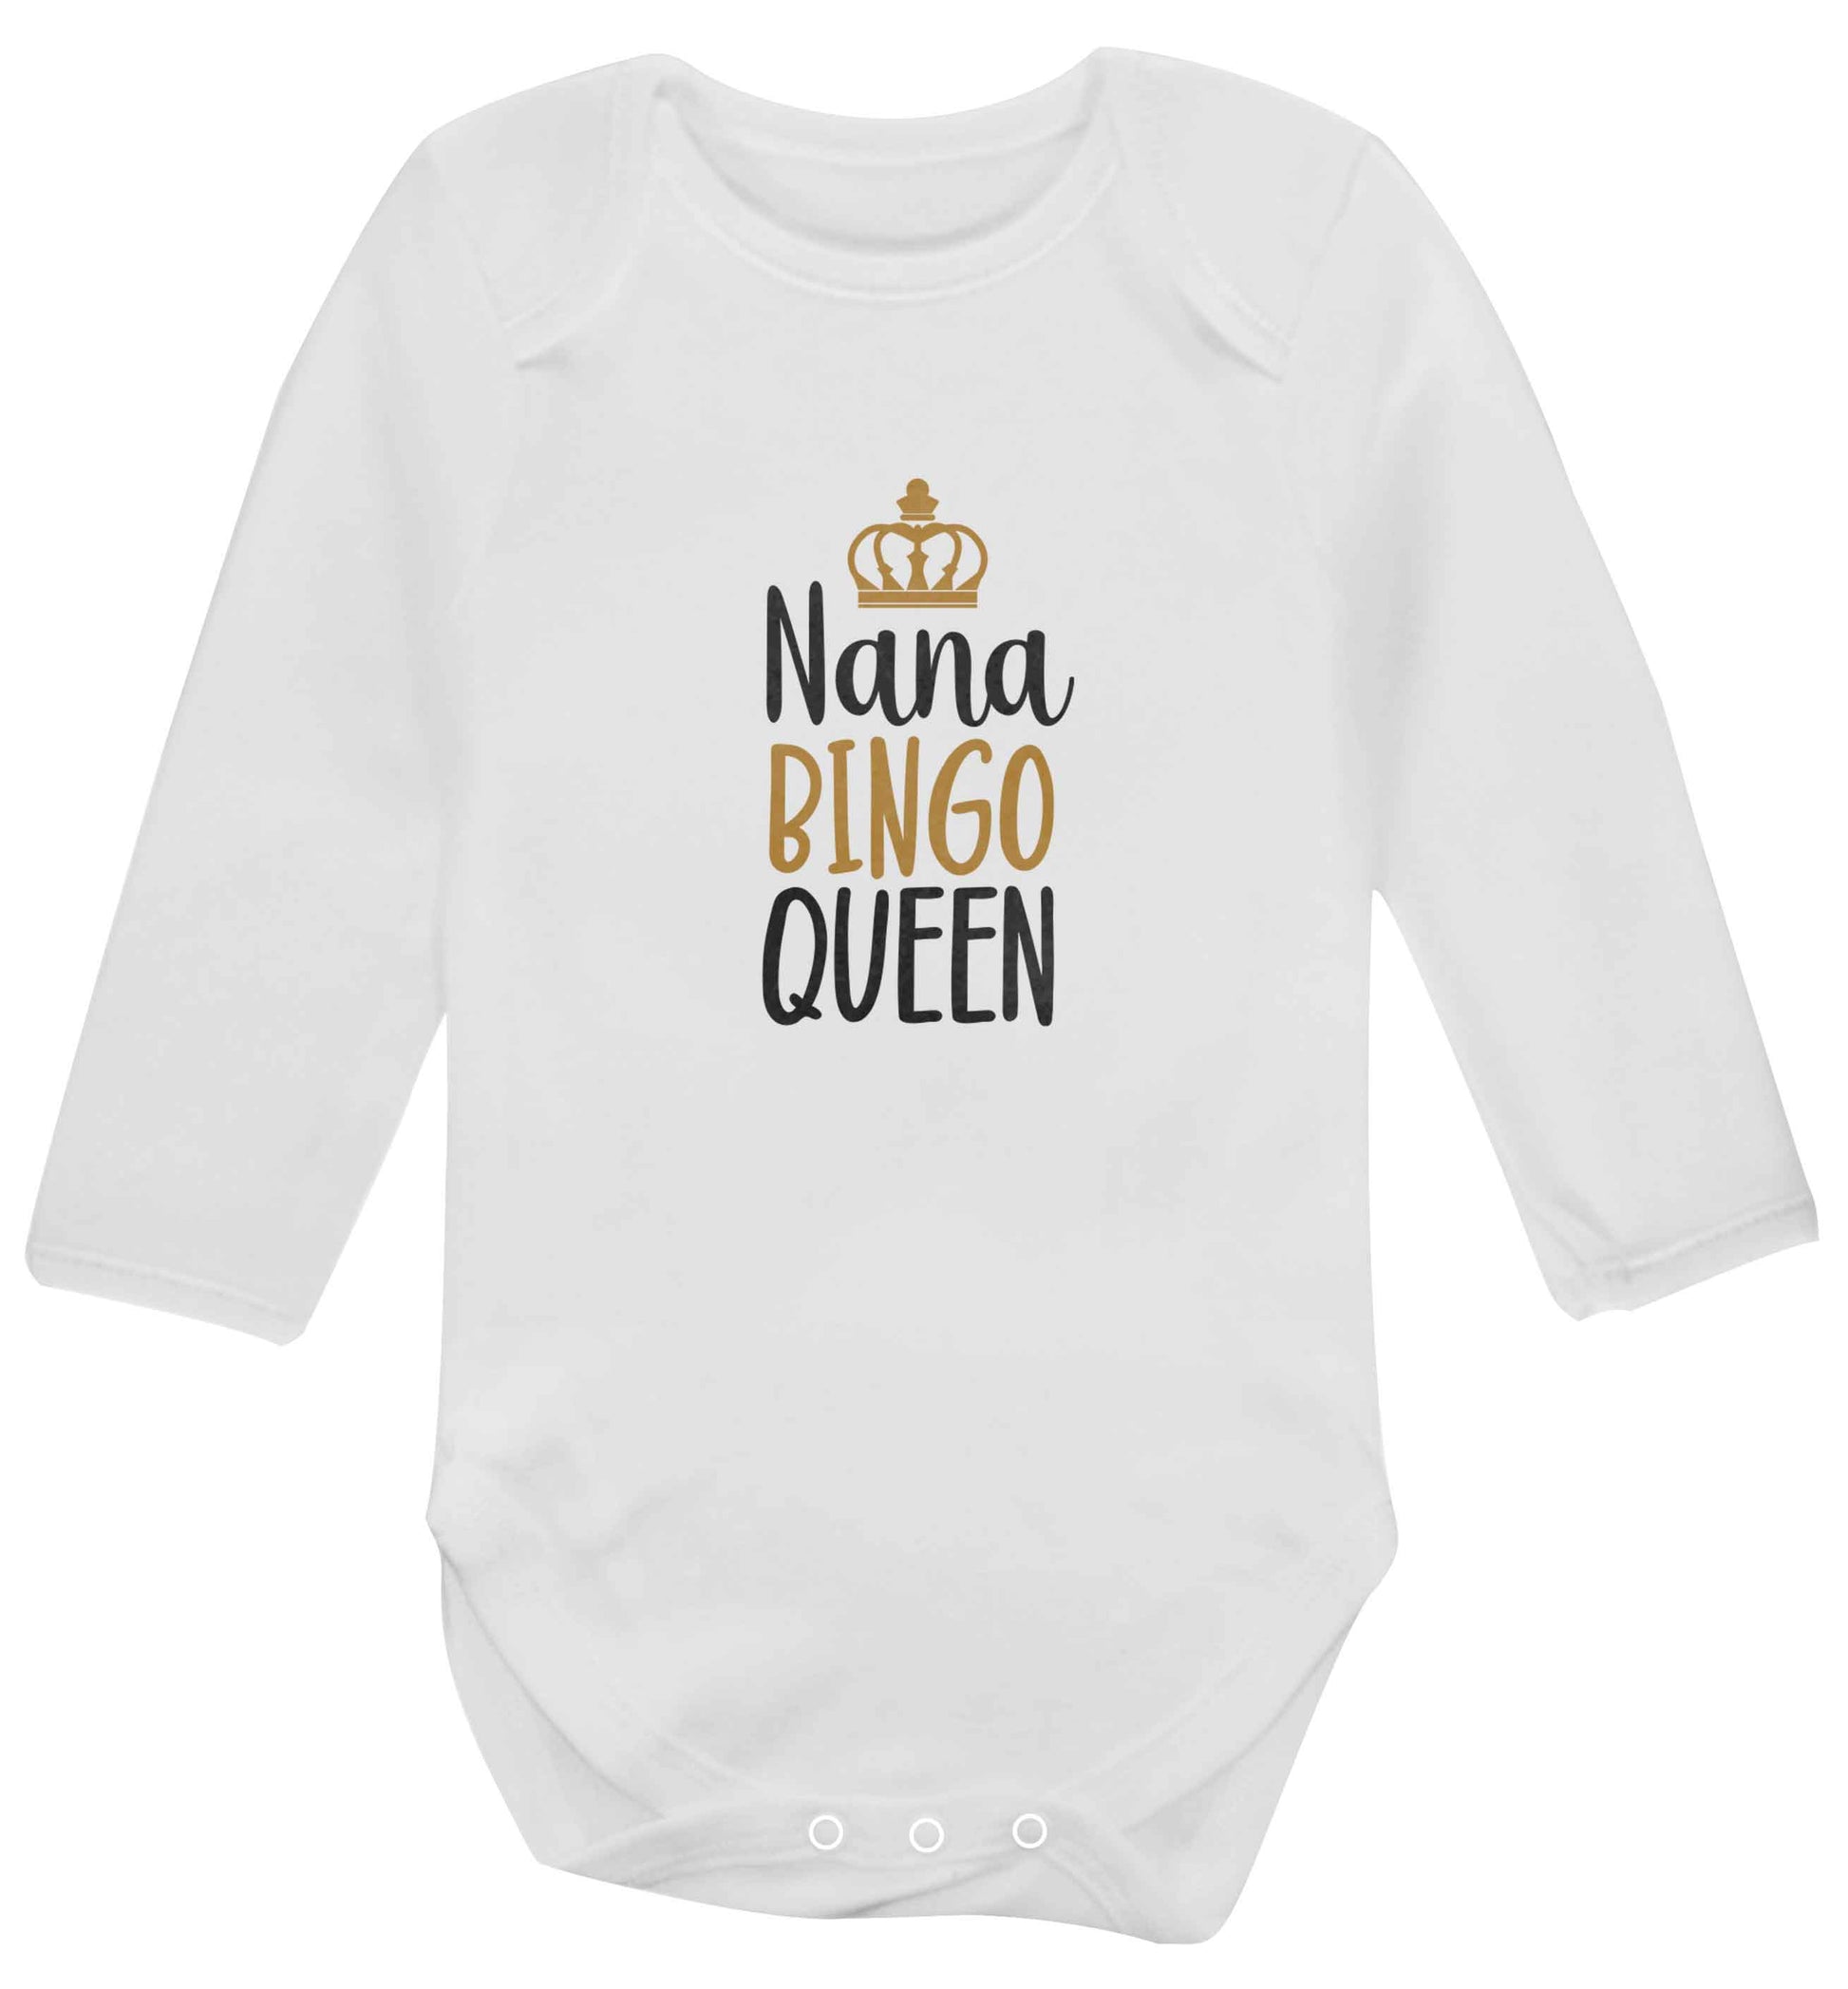 Personalised bingo queen baby vest long sleeved white 6-12 months